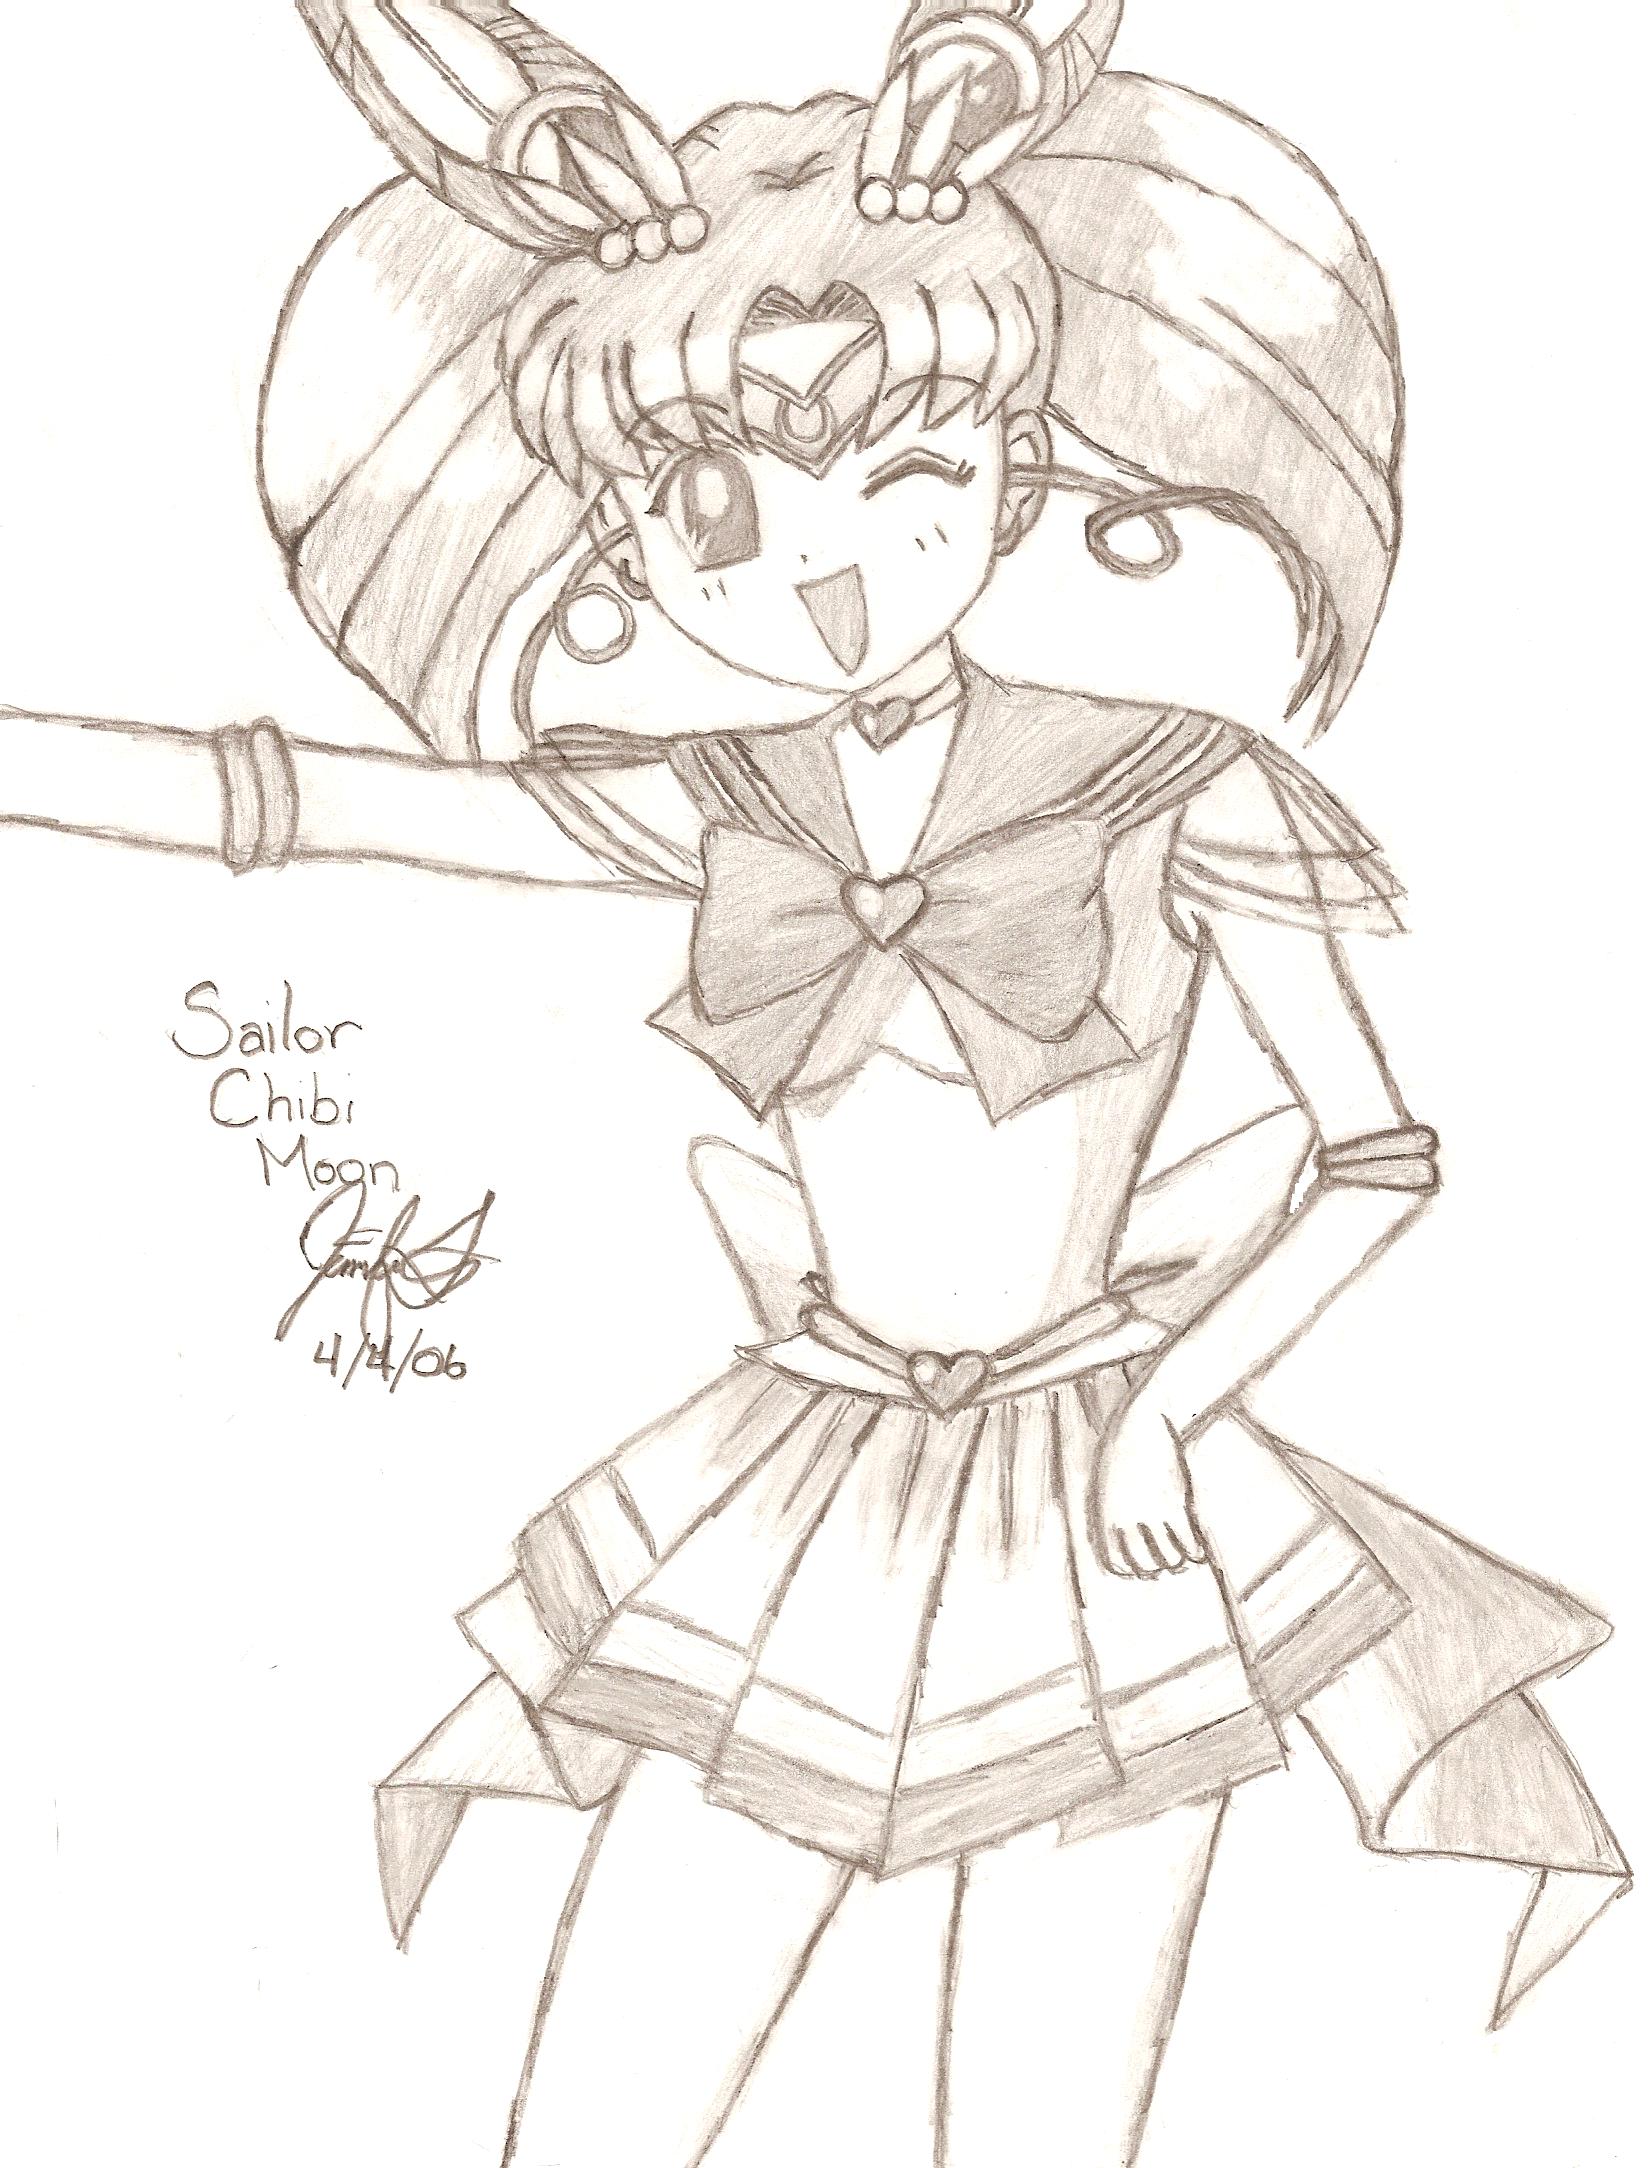 **Sailor Chibi Moon (first try) by magicsinyou